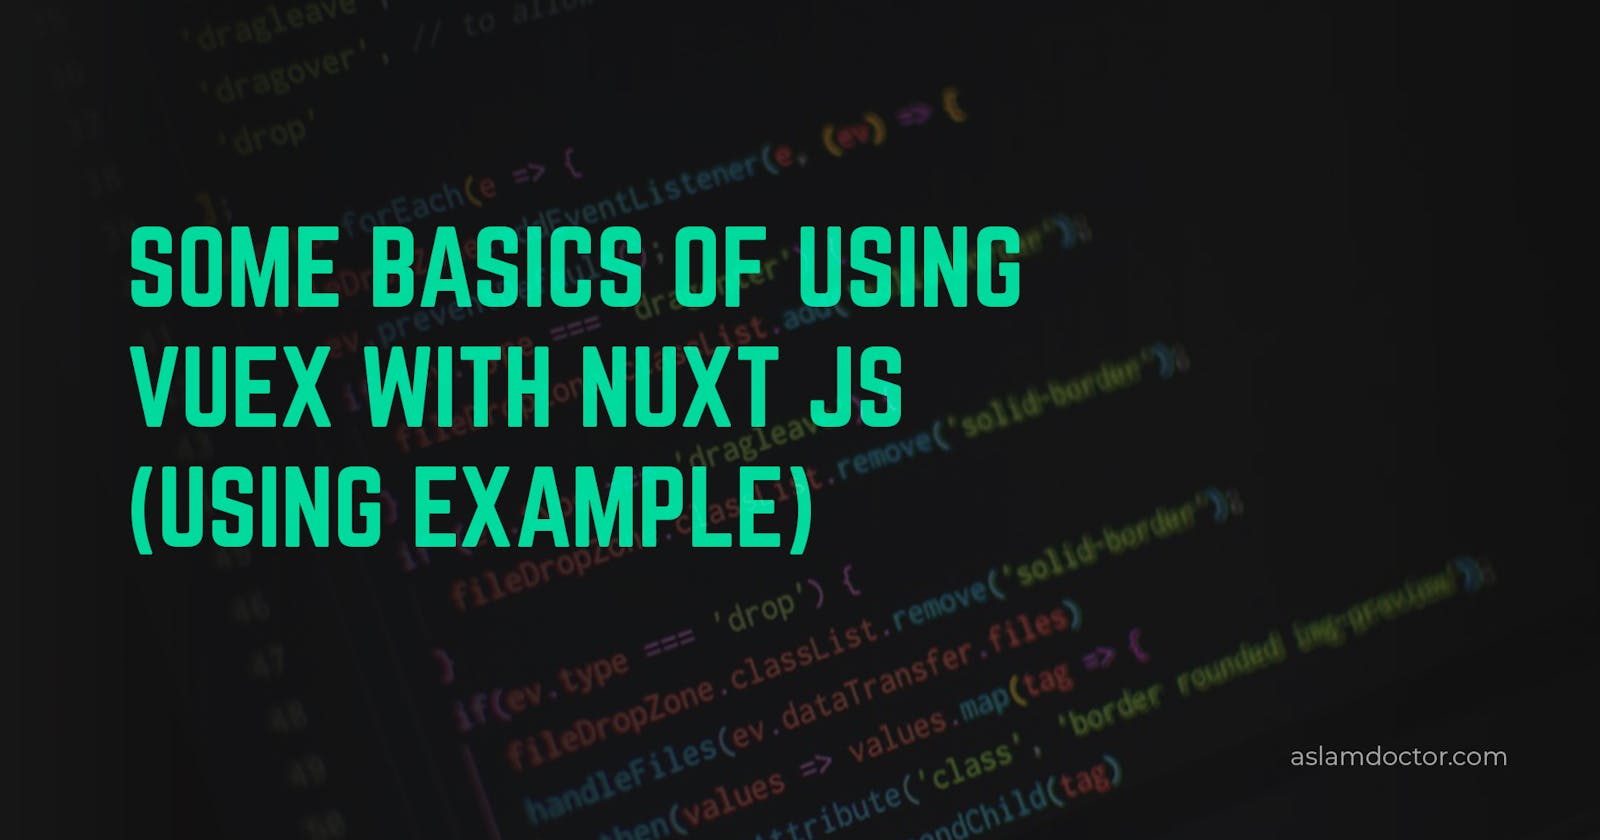 Some basics of using Vuex with Nuxt JS - with Example